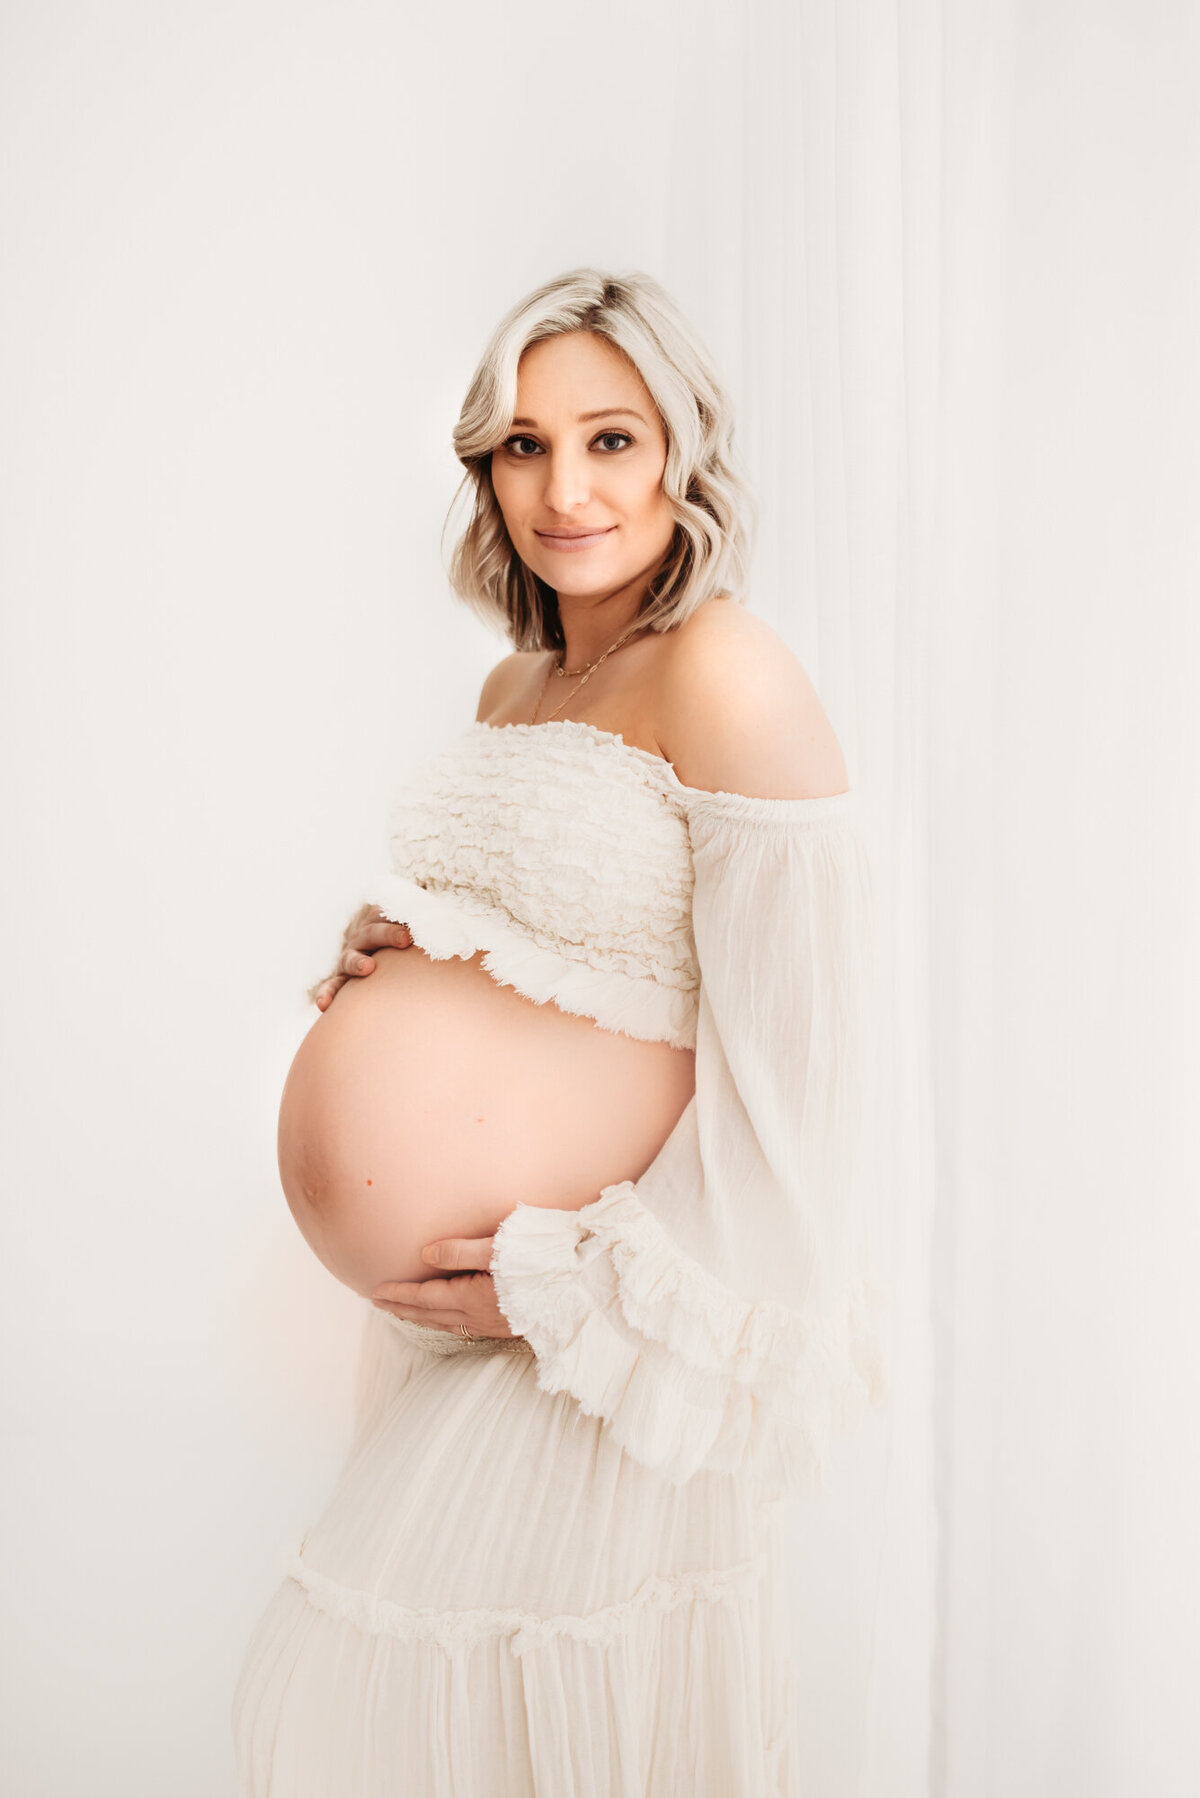 pregnant mother looking at camera holding belly in white room